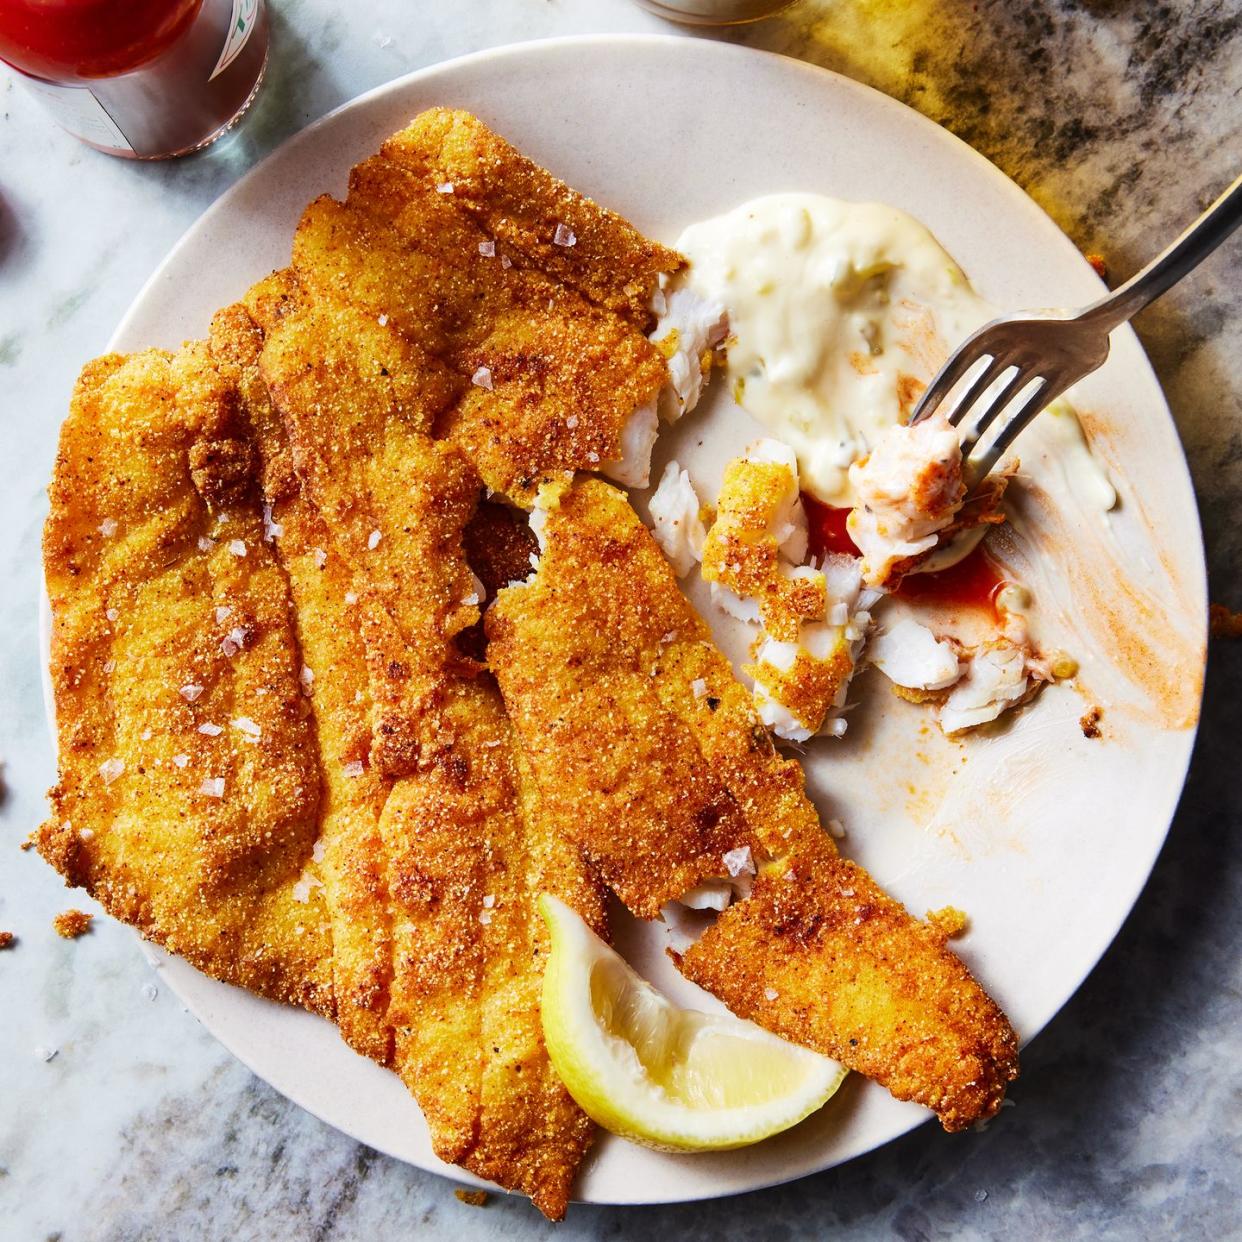 thin white fish coated in a seasoned cornmeal and flour blend, then shallow fried until golden brown and beautiful